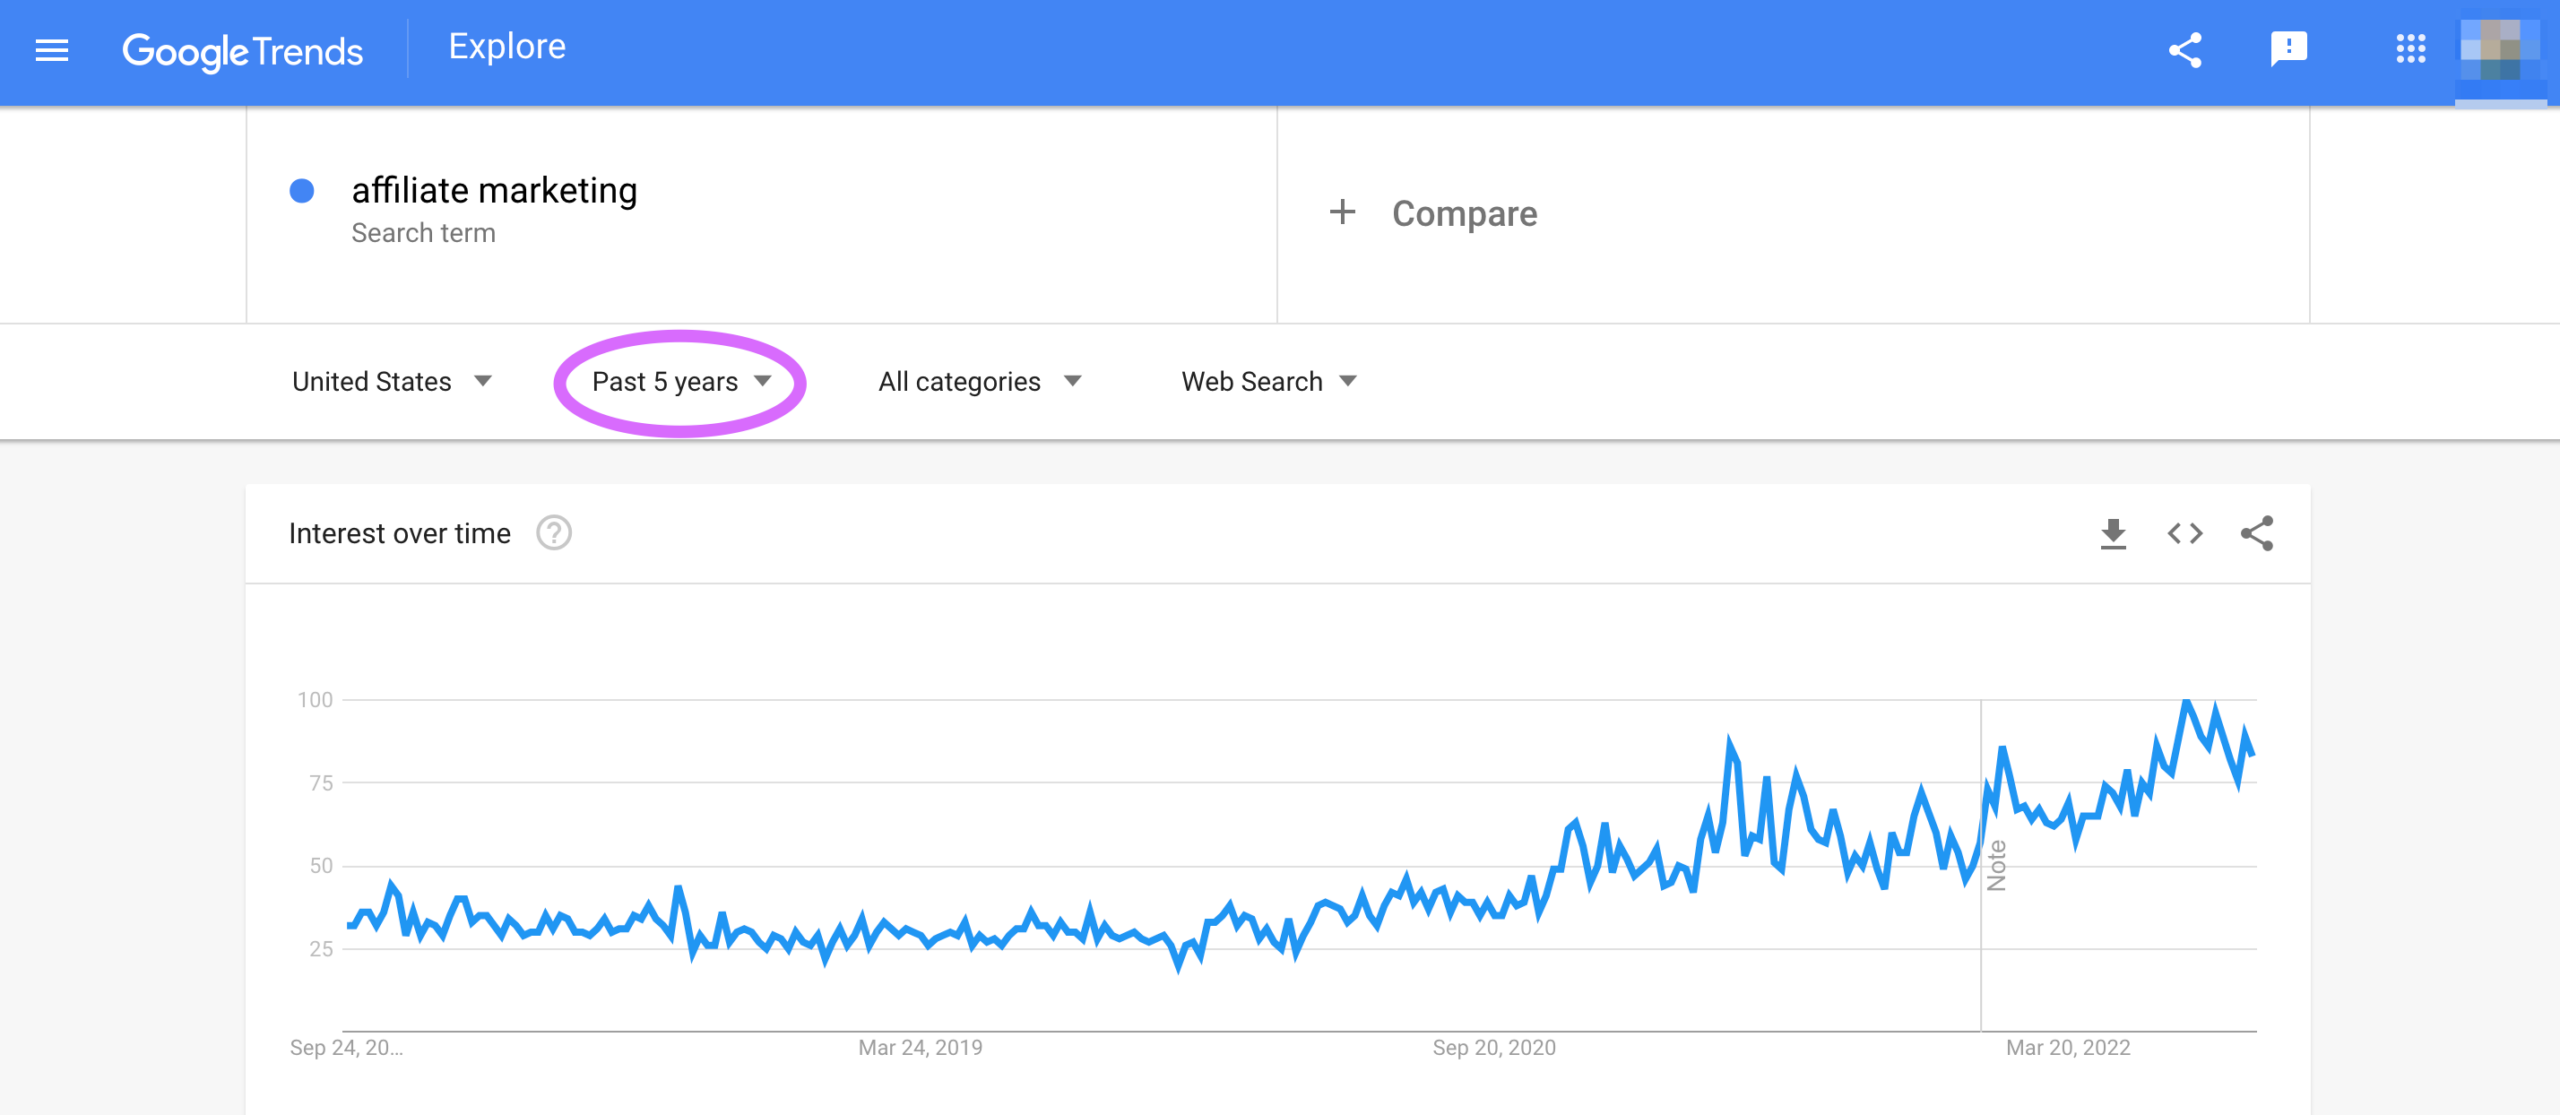 affiliate marketing stat showing a rise in the search term "affiliate marketing" over the past five years